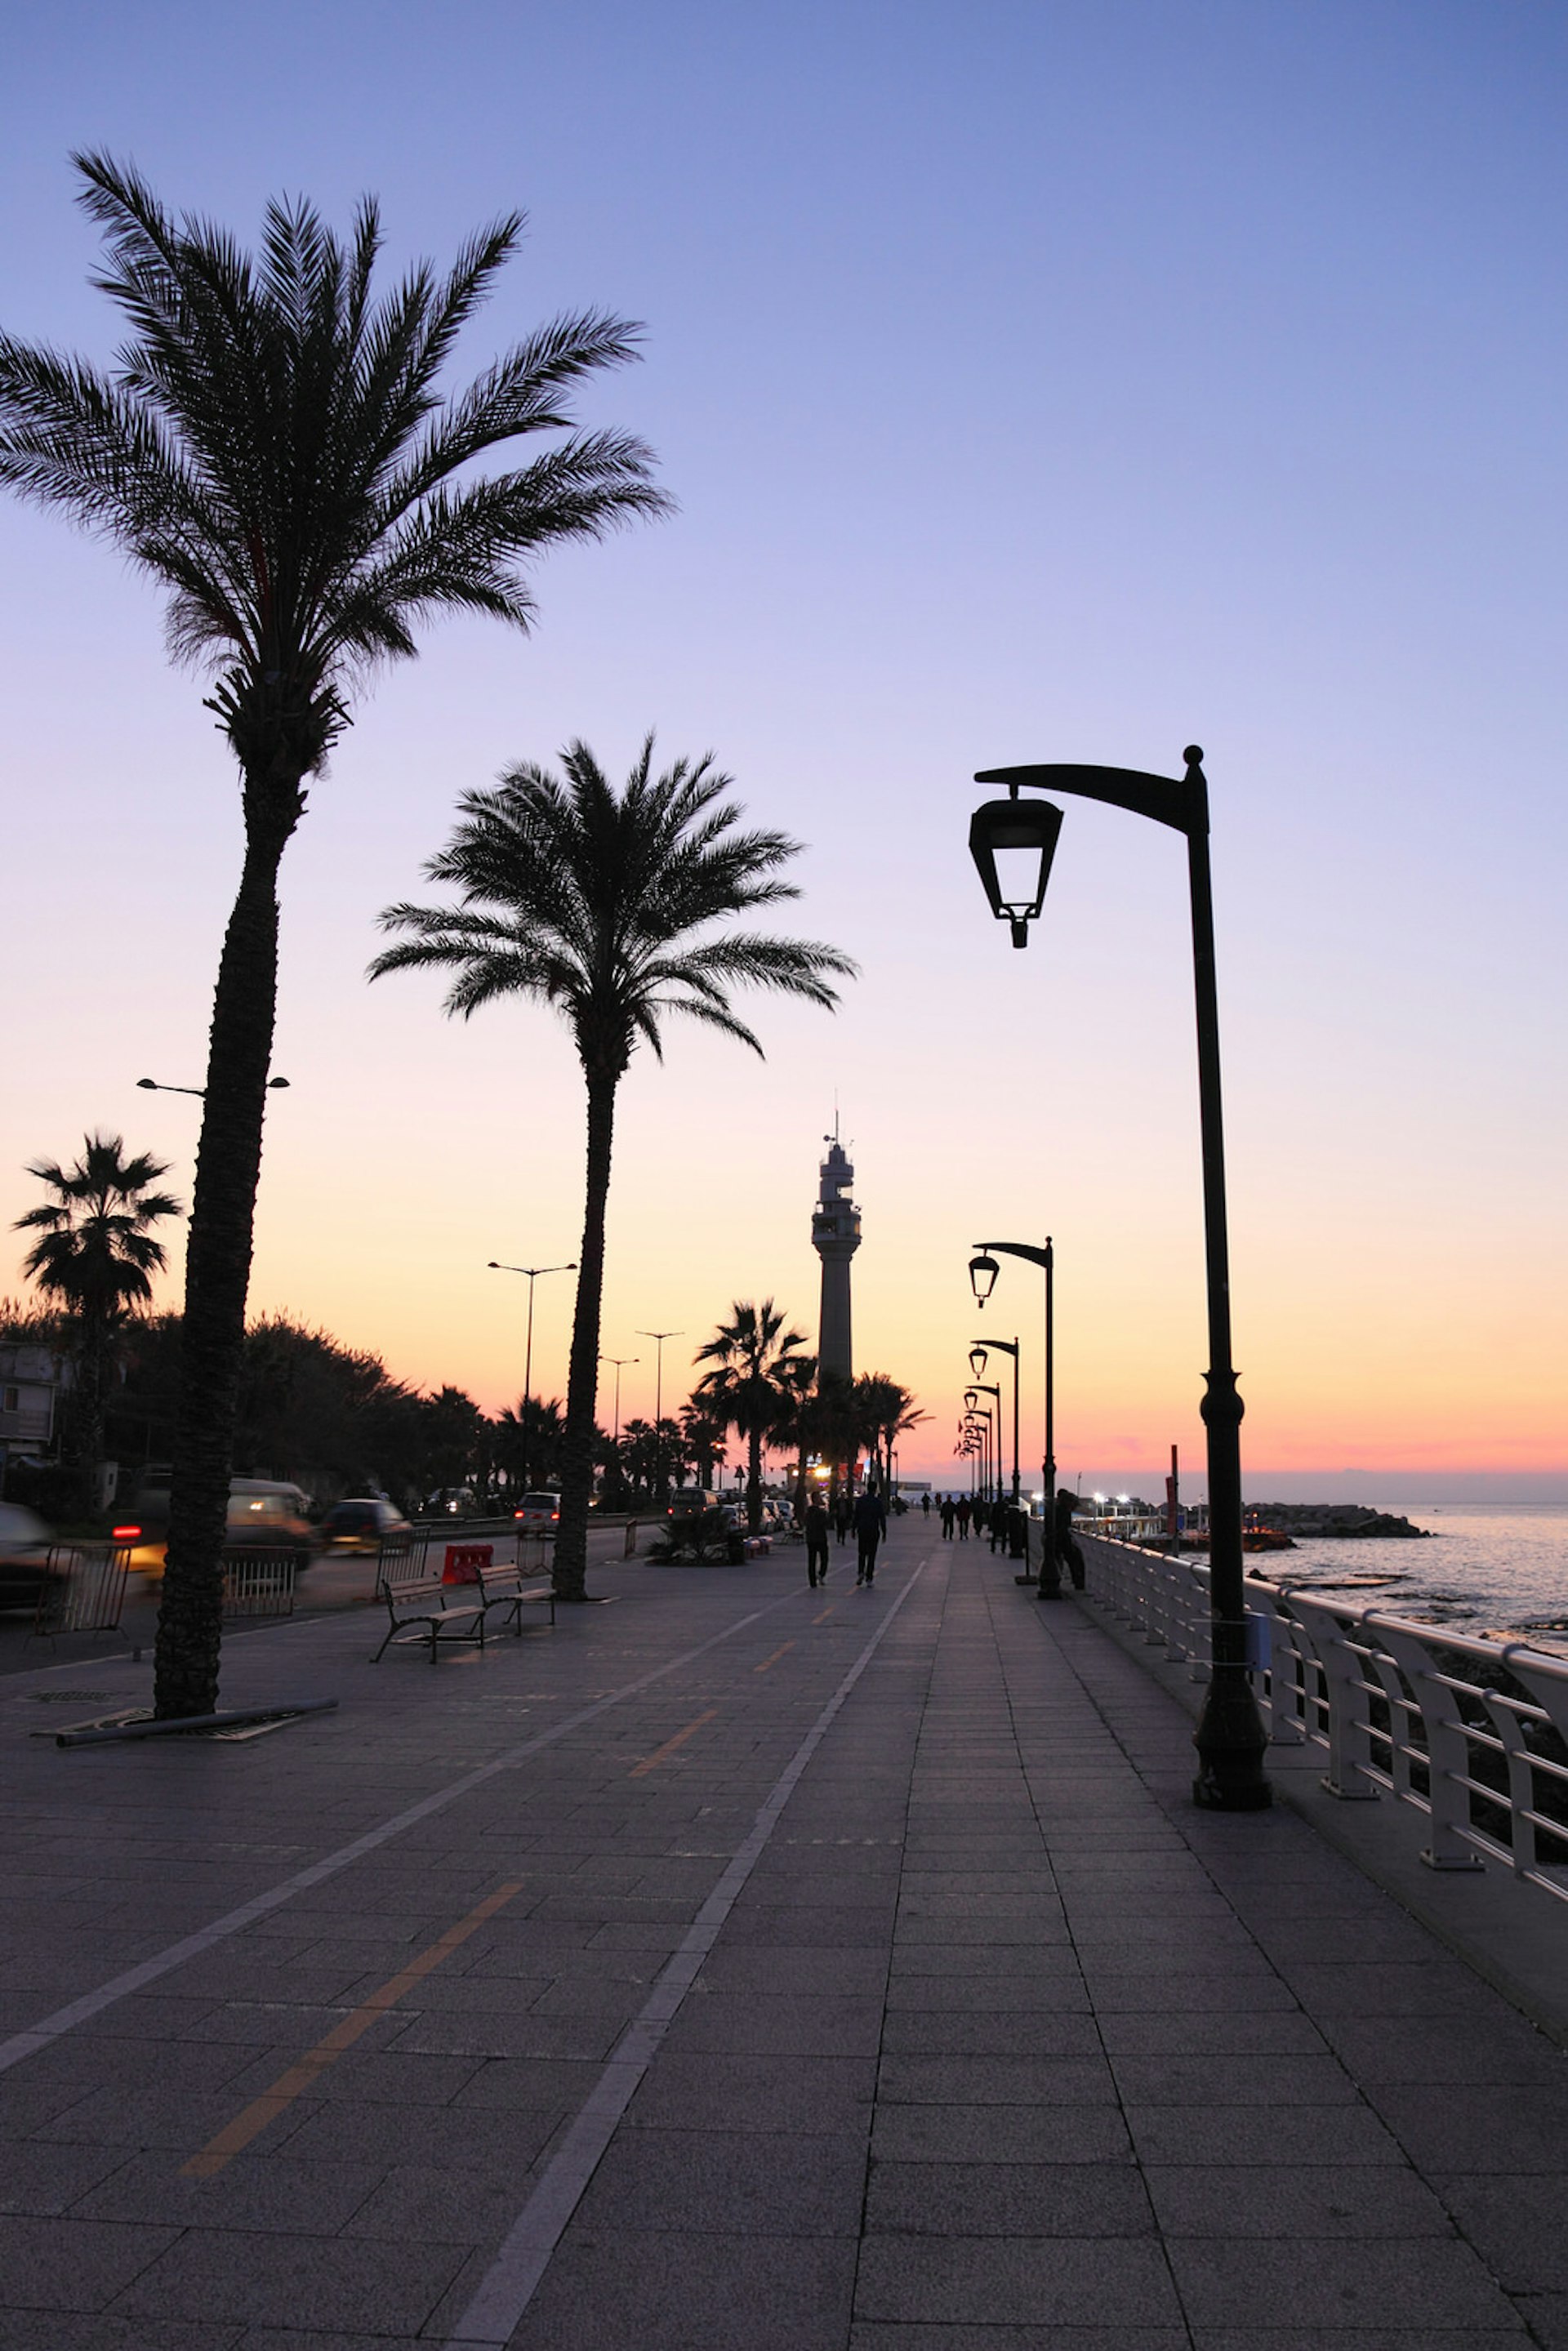 People strolling on the Beirut Corniche at sunset. Image by dkaranouh / Getty